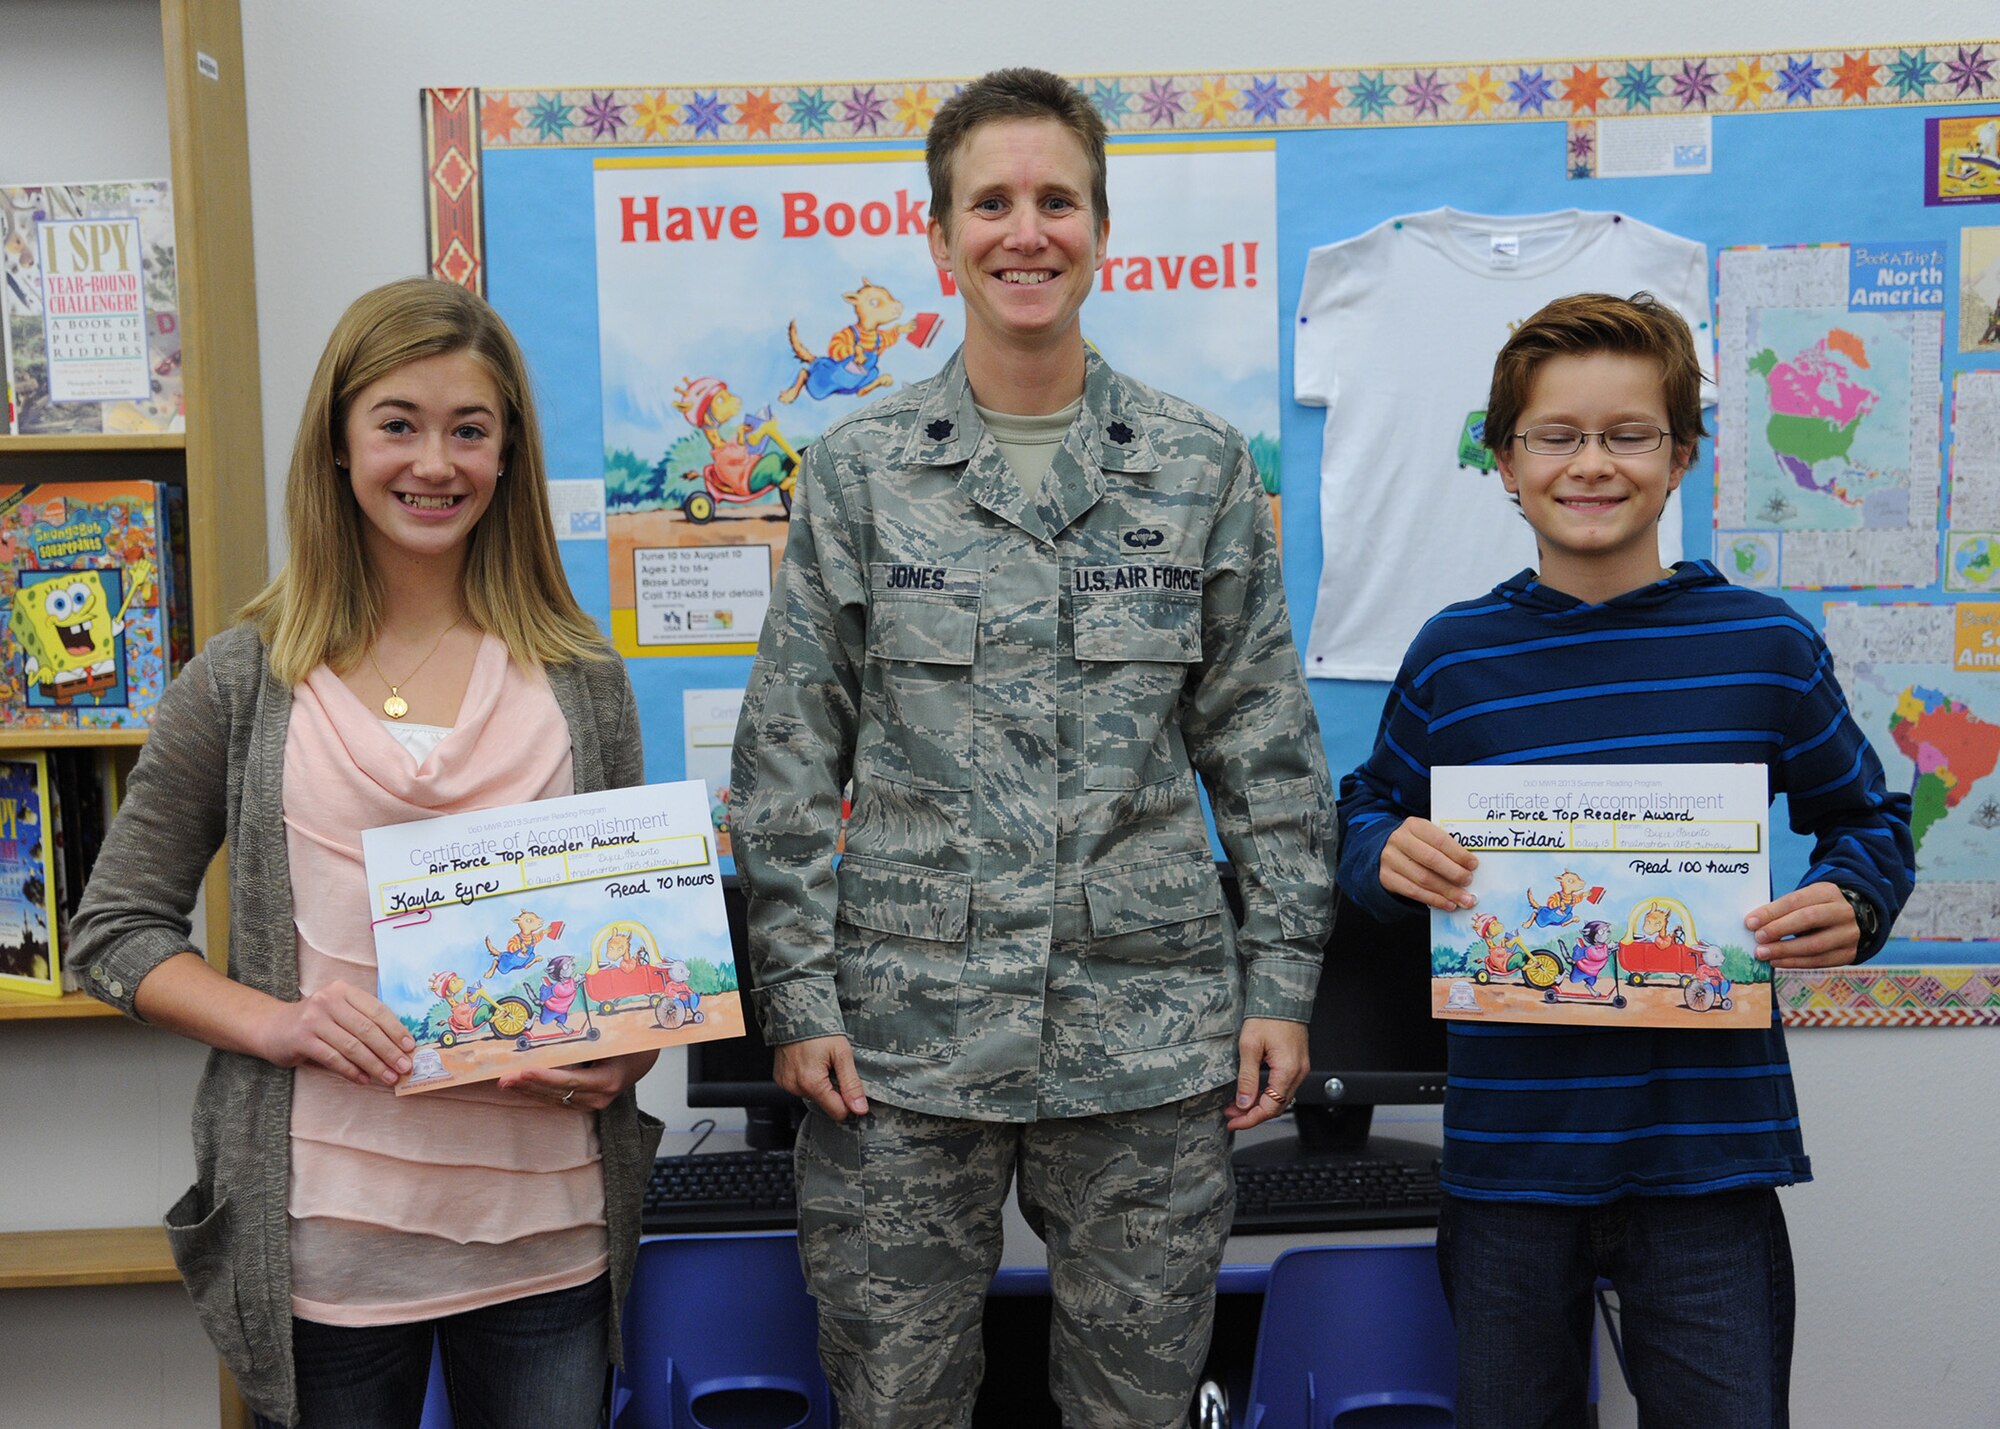 Lt. Col. Sabrina Jones, 341st Force Support Squadron commander, poses with Kayla Eyre (left), daughter of Master Sgt. Bryon Eyre, 819th RED HORSE Squadron combat arms instructor, and Massimo Fidani, son of Chief Master Sgt. Frank Fidani, 341st Missile Wing command chief, who both won in the Air Force Top Reader Contest. Eyre won the Top Young Adult Category for reading 4,200 minutes and Fidani won the Top Children Category for reading 6,000 minutes. (U.S. Air Force photo/Senior Airman Katrina Heikkinen)